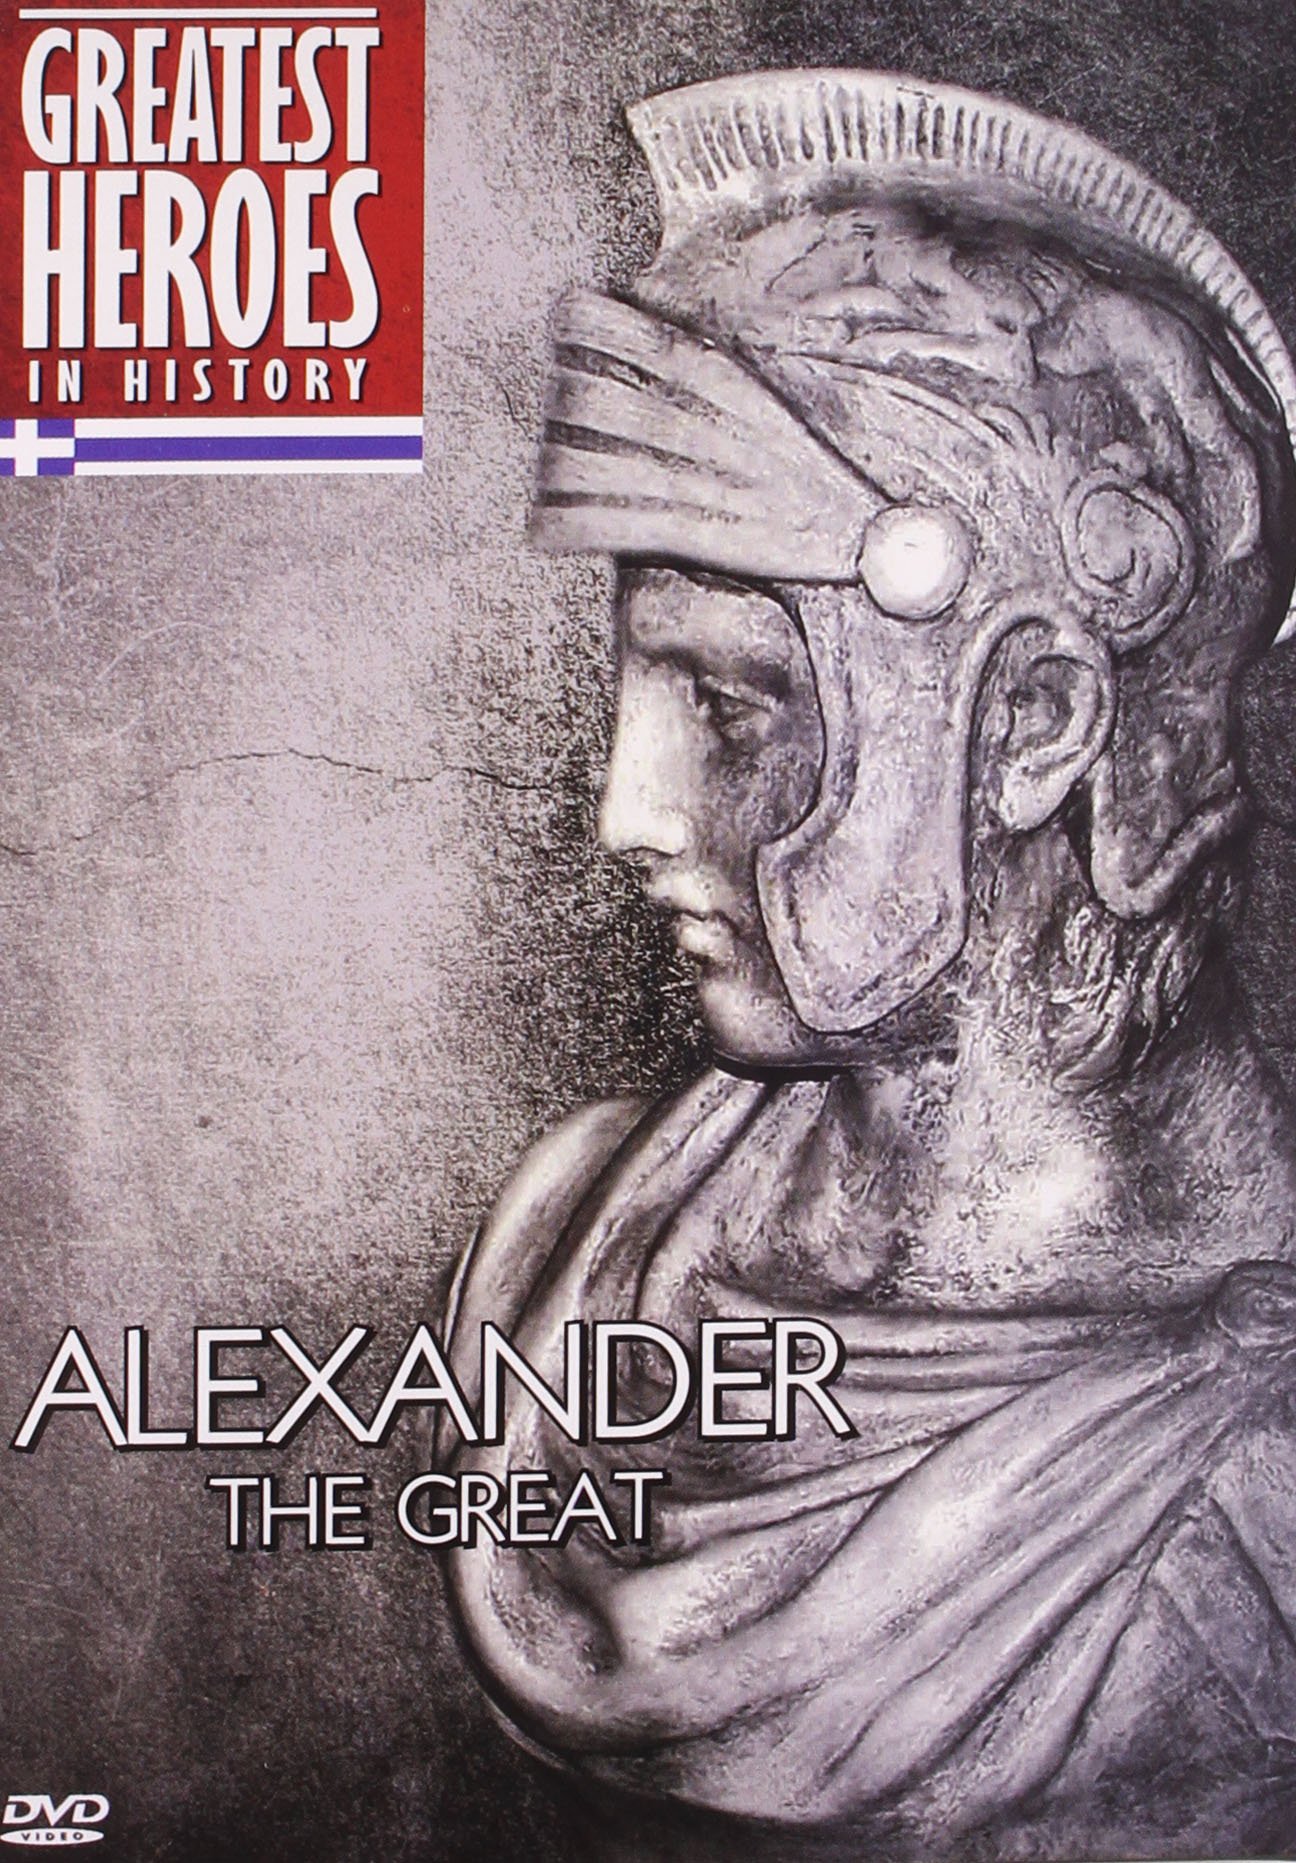 the-great-heroes-alexander-the-great-movie-purchase-or-watch-online